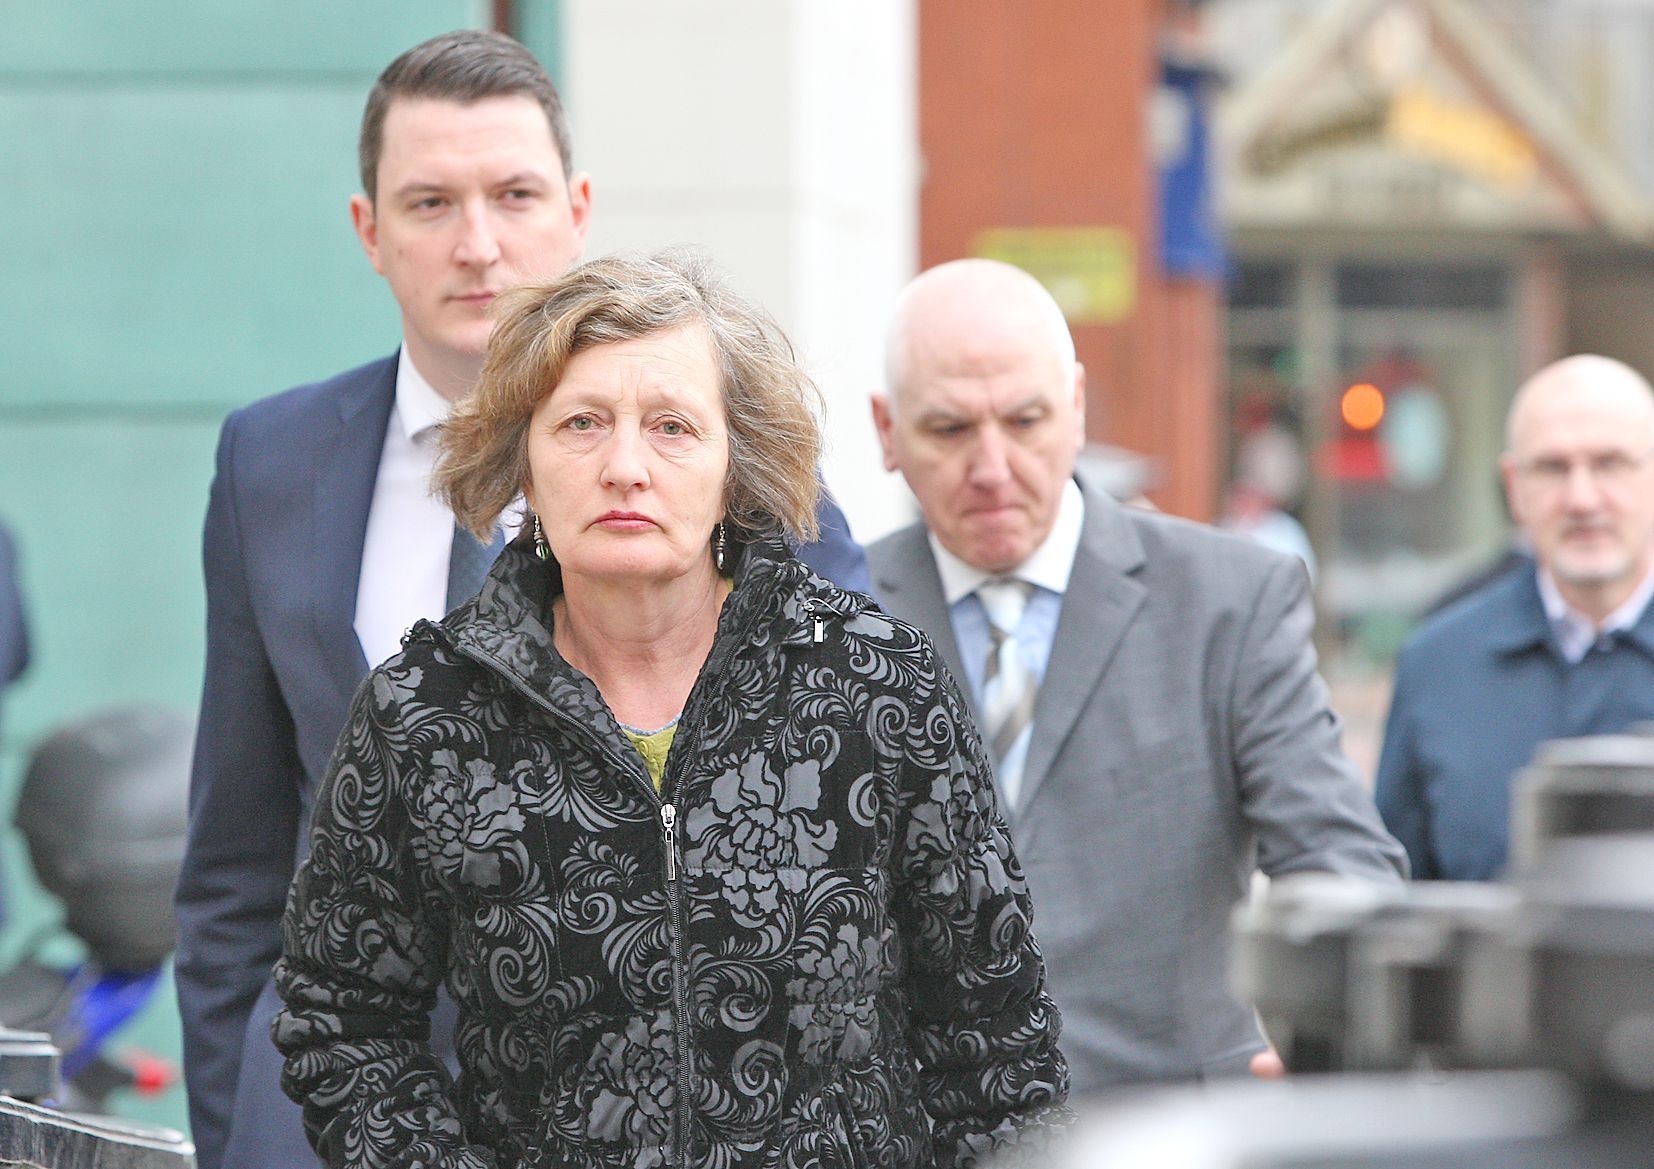 TRUTH: John and Geraldine Finucane have been campaigning with the wider Finucane family for the truth surrounding Pat’s 1989 murder